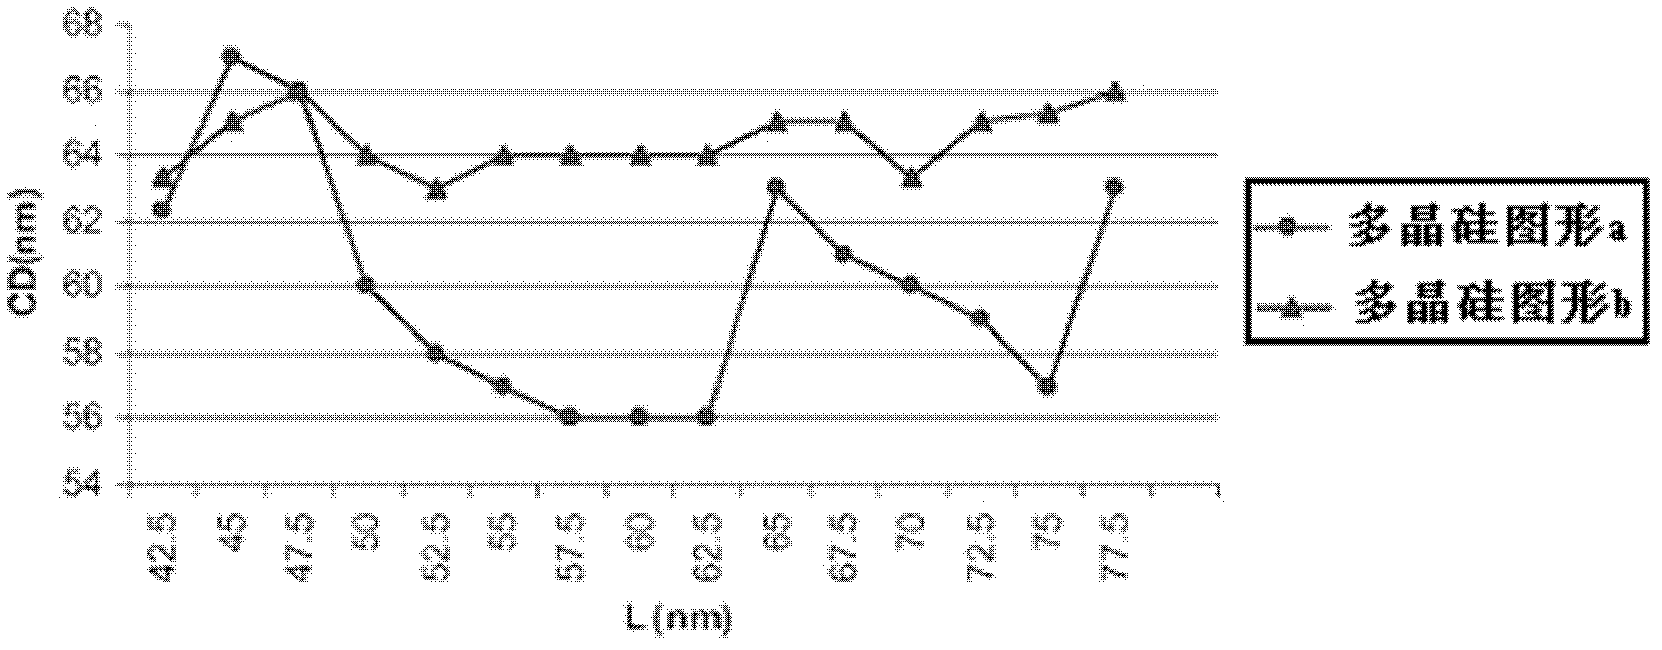 Insertion method for filling redundant polysilicon strip arrays in existing layout